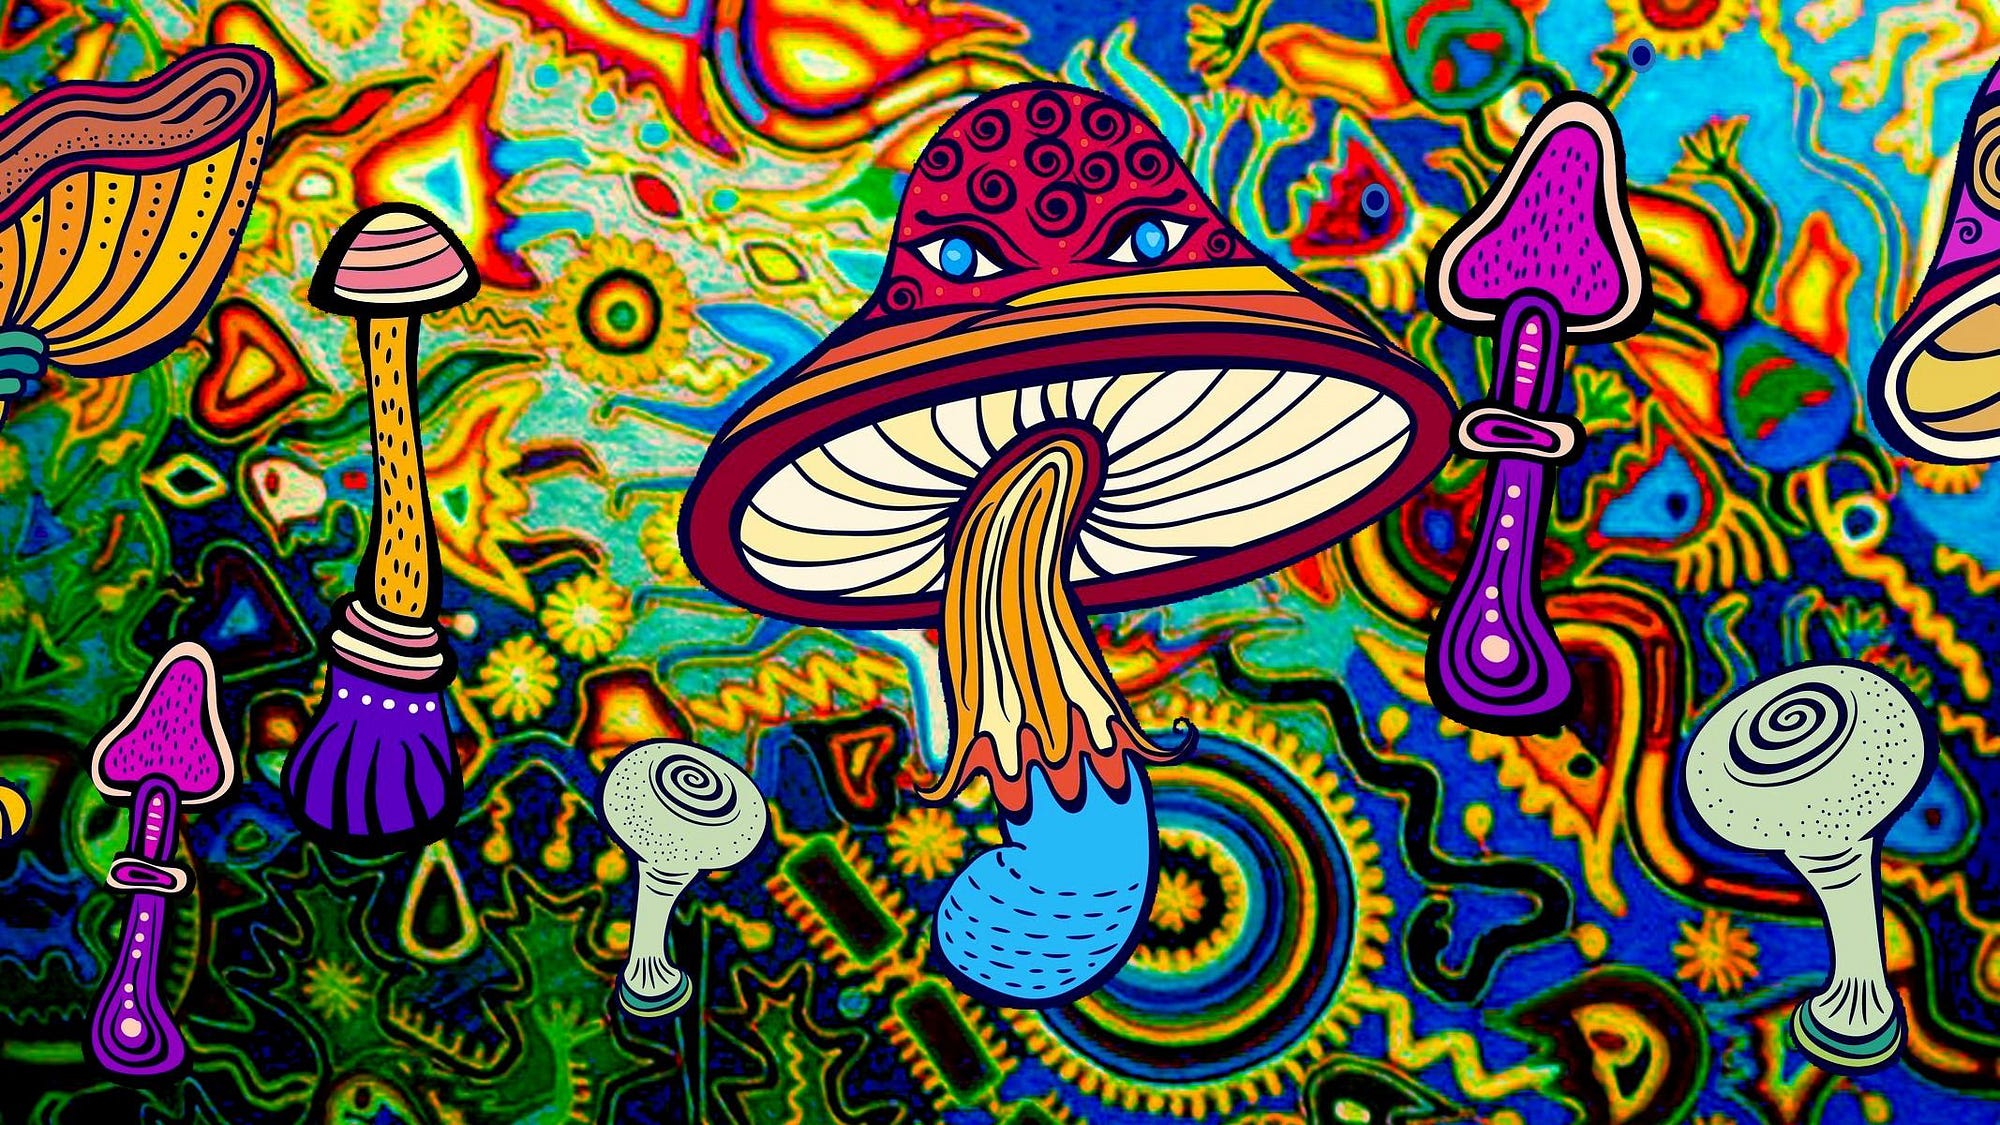 philanthropy-psychedelics-and-effective-altruism-by-marc-gunther